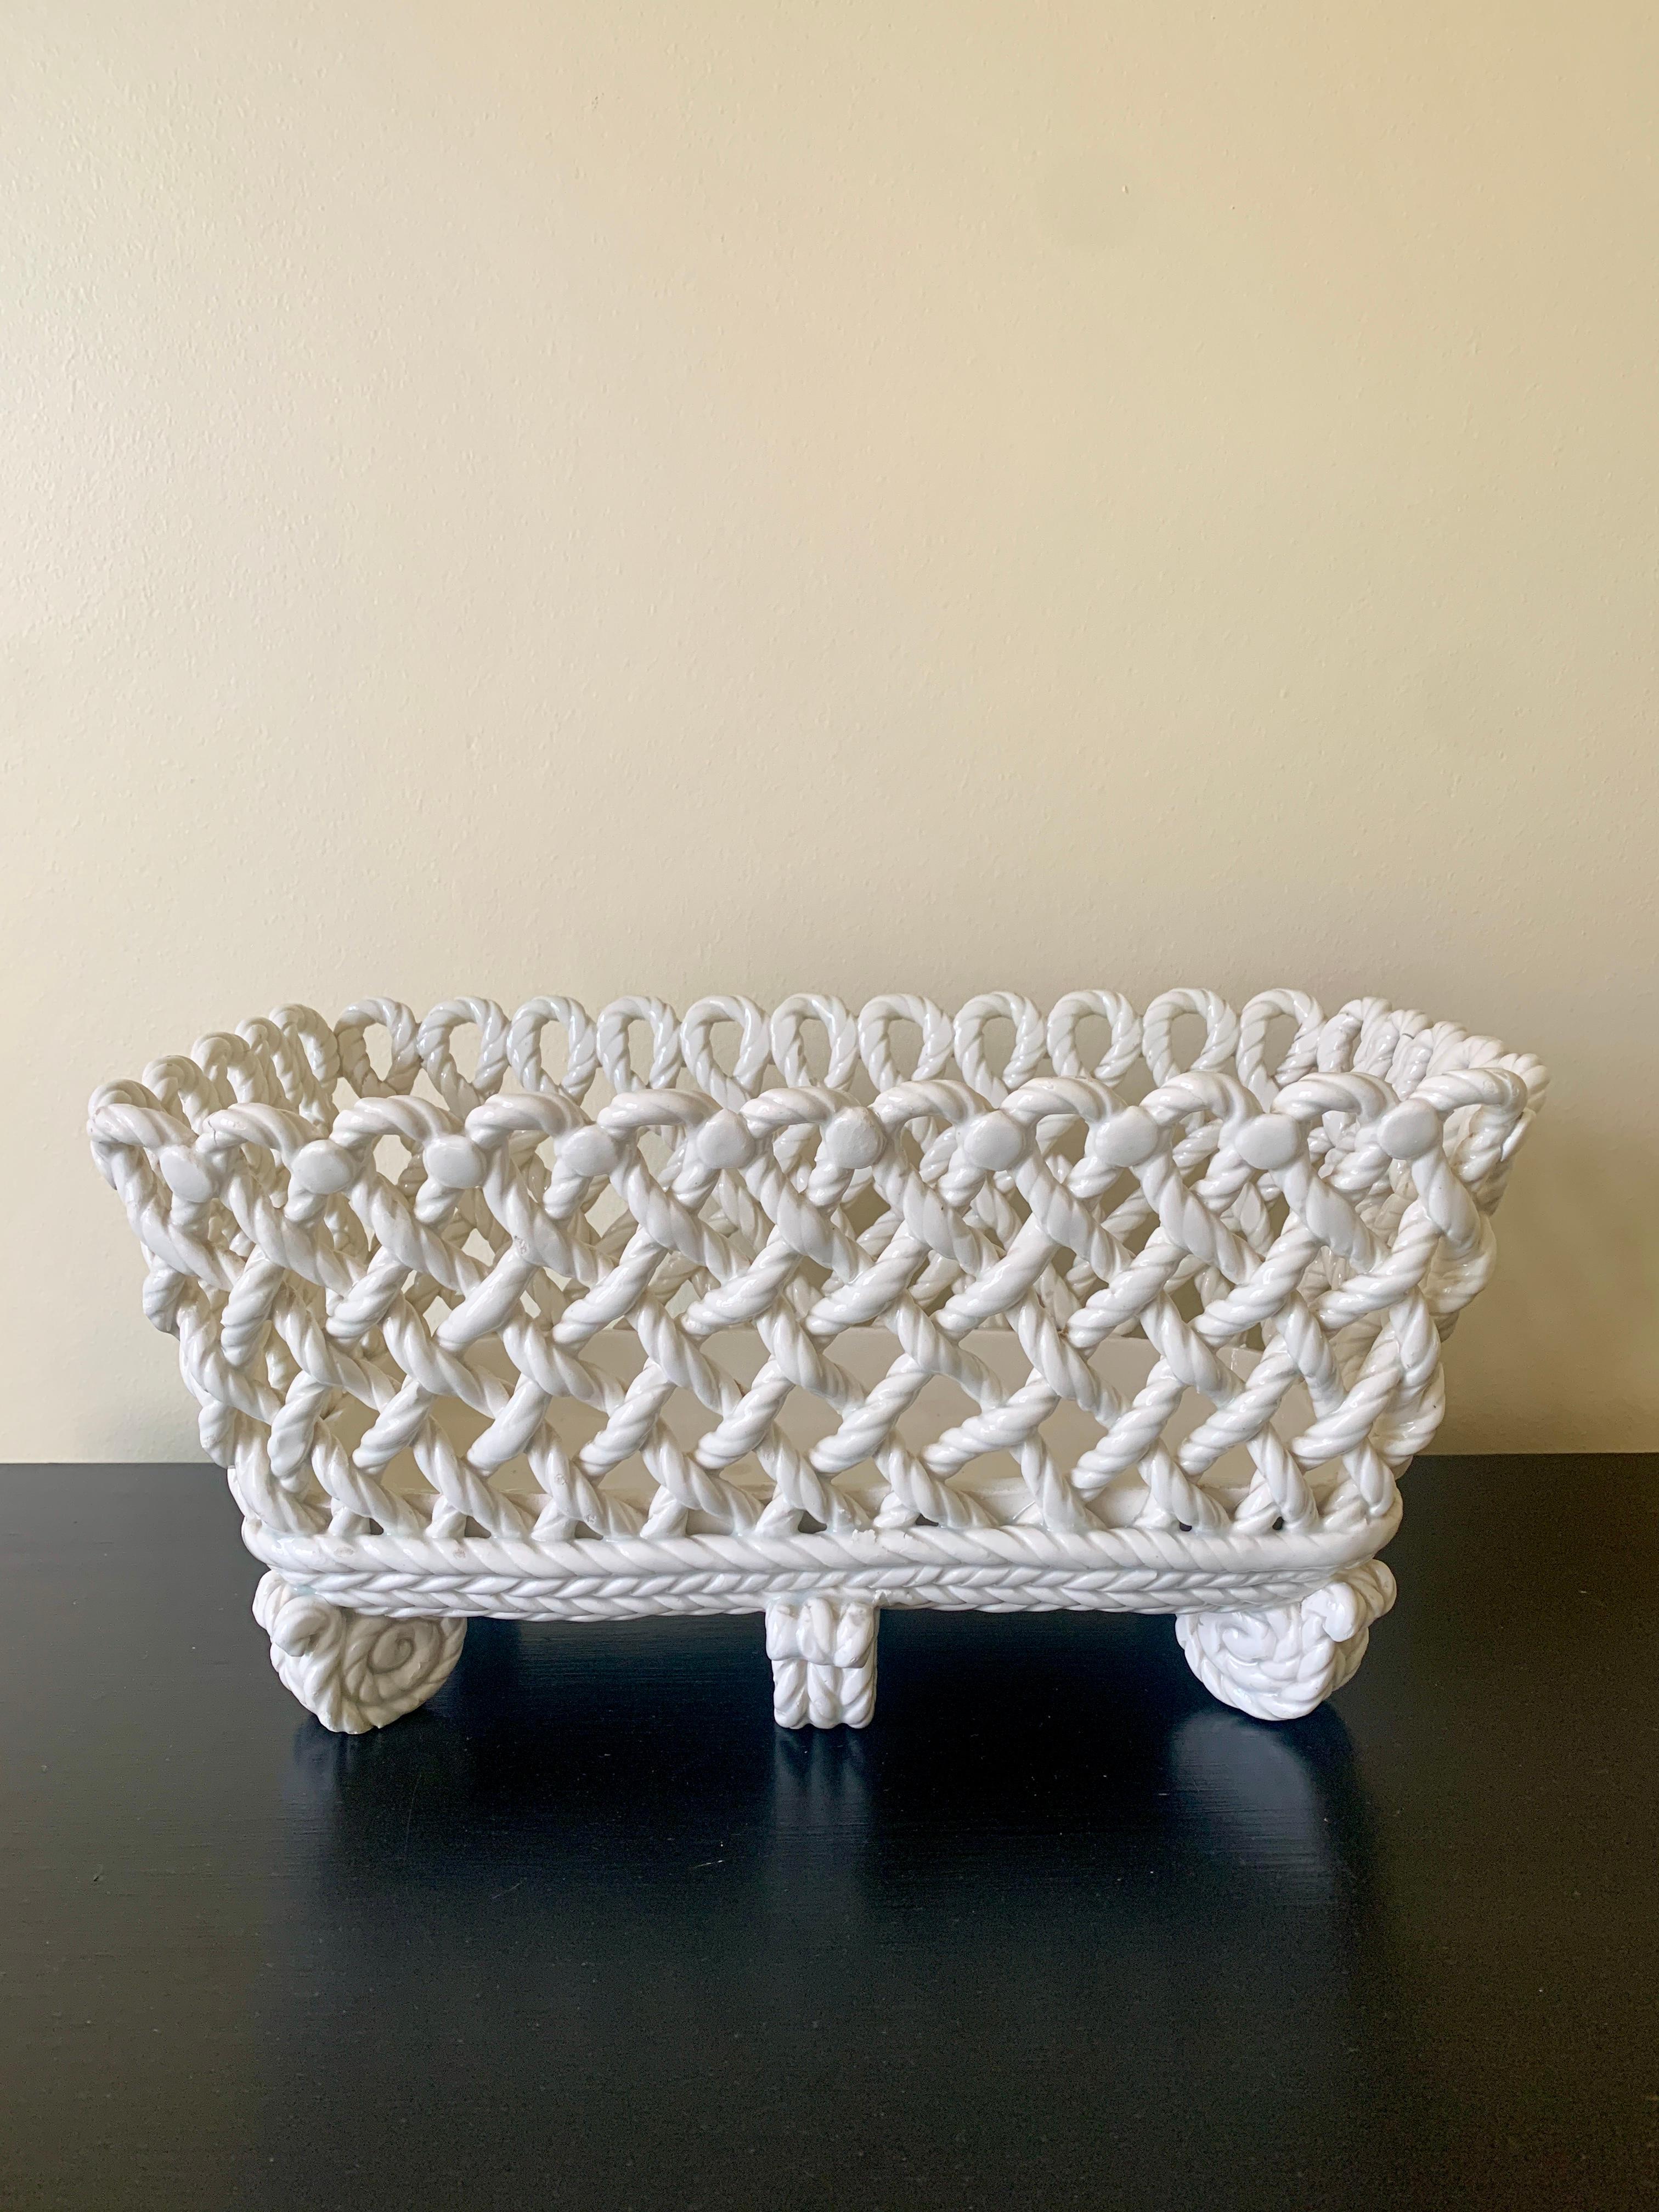 A gorgeous trompe l'oeil white French Country style reticulated porcelain woven rope basket cachepot 

Spain, Circa 1980s

Measures: 13.5